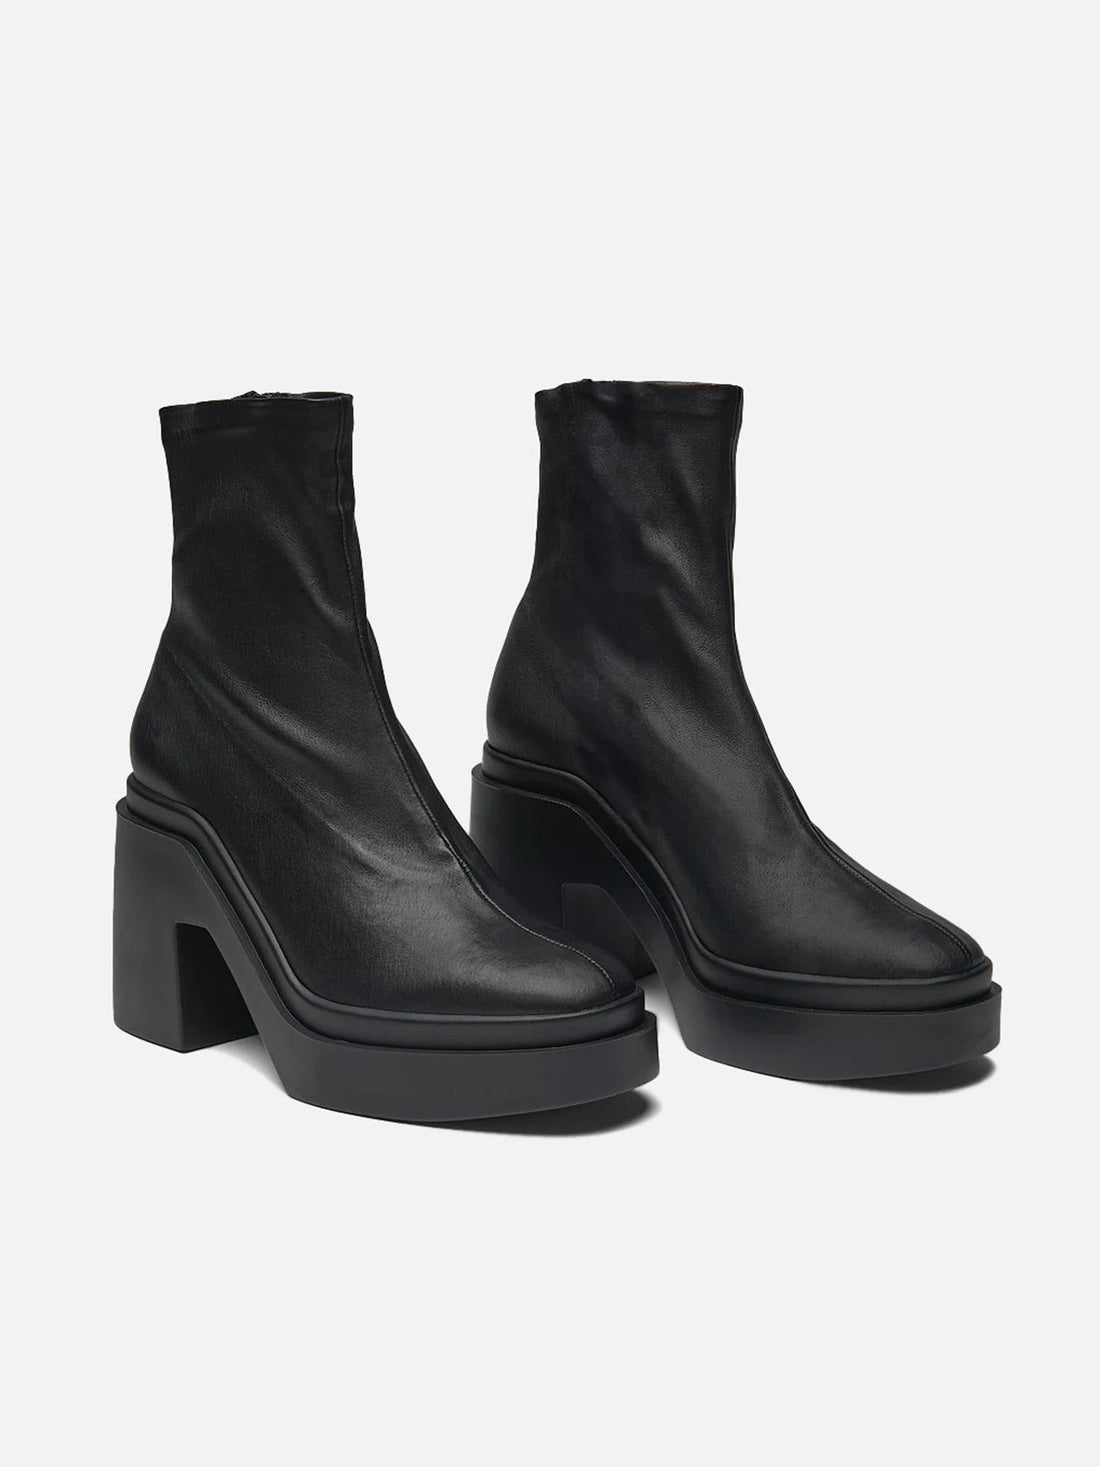 ANKLE BOOTS - NINA ankle boots, leather black - 3606063818780 - Clergerie Paris - Europe